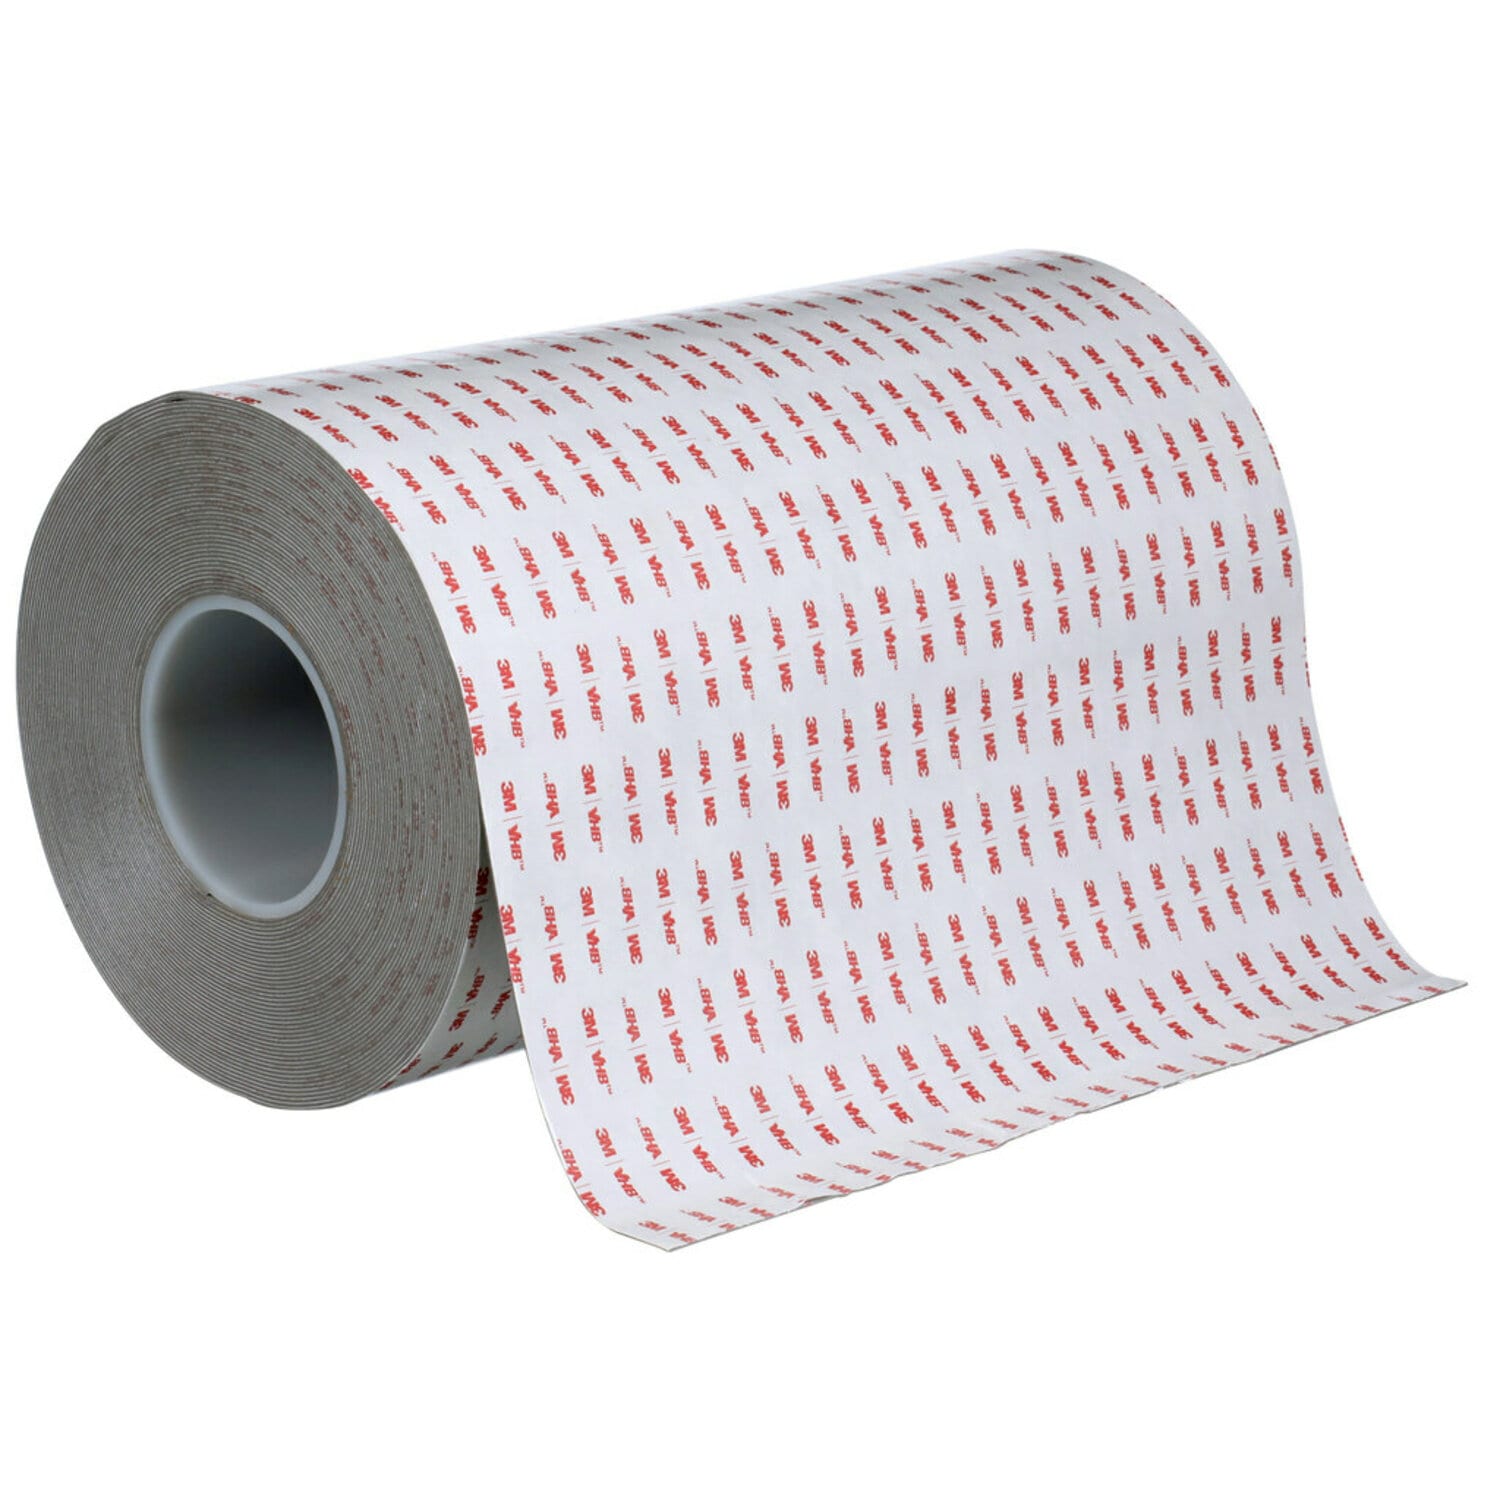 7100273437 - 3M VHB Tape RP+110GP, Gray, 22 in x 36 yd, 45 mil, Paper Liner, 1 Roll/Case